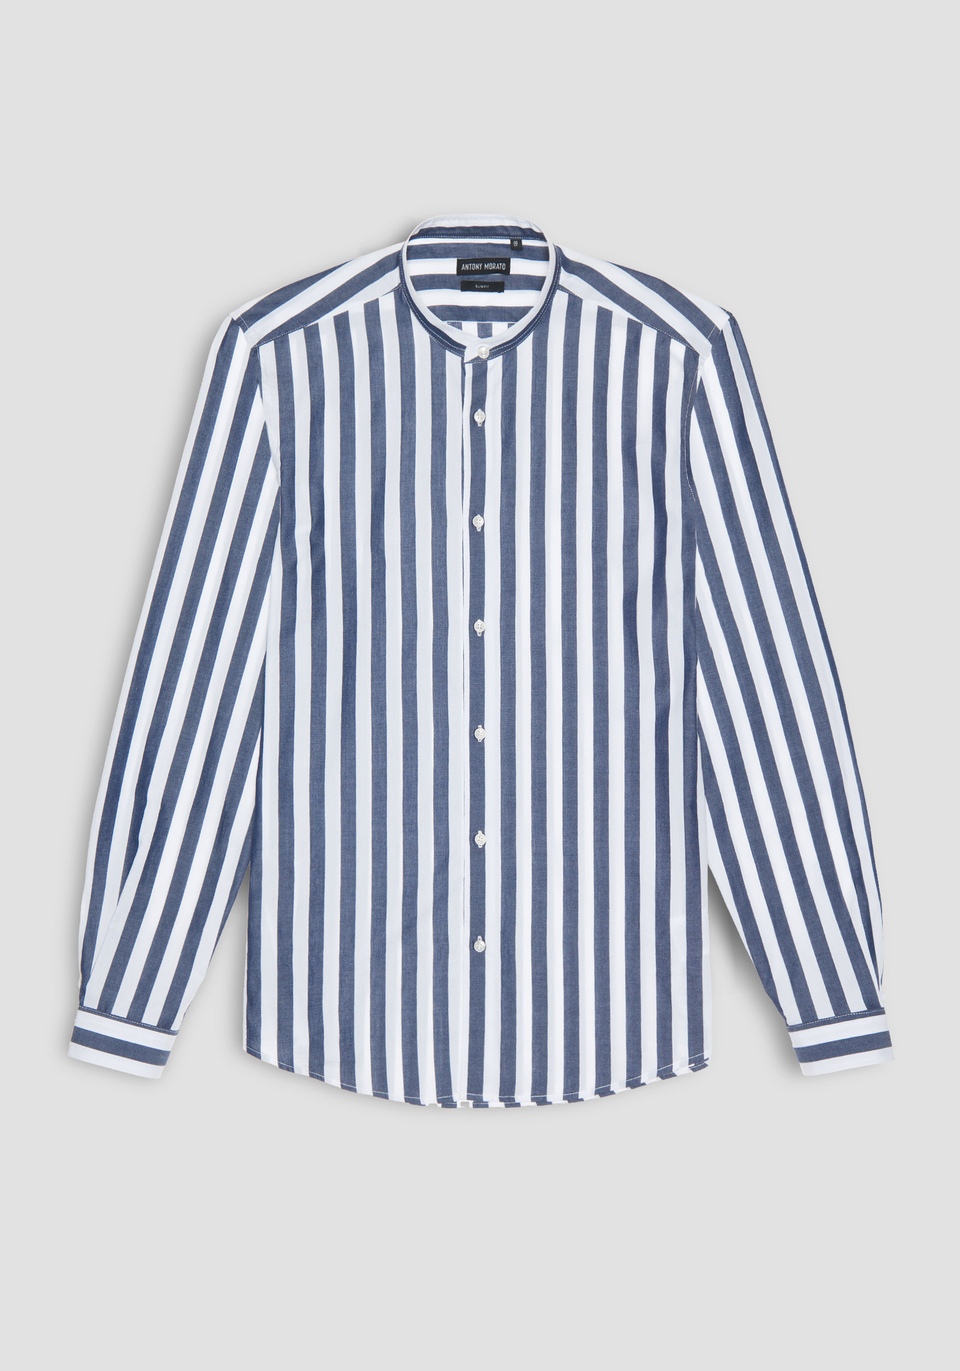 SLIM-FIT SHIRT IN 100% STRIPED COTTON WITH A MANDARIN COLLAR - Antony Morato Online Shop